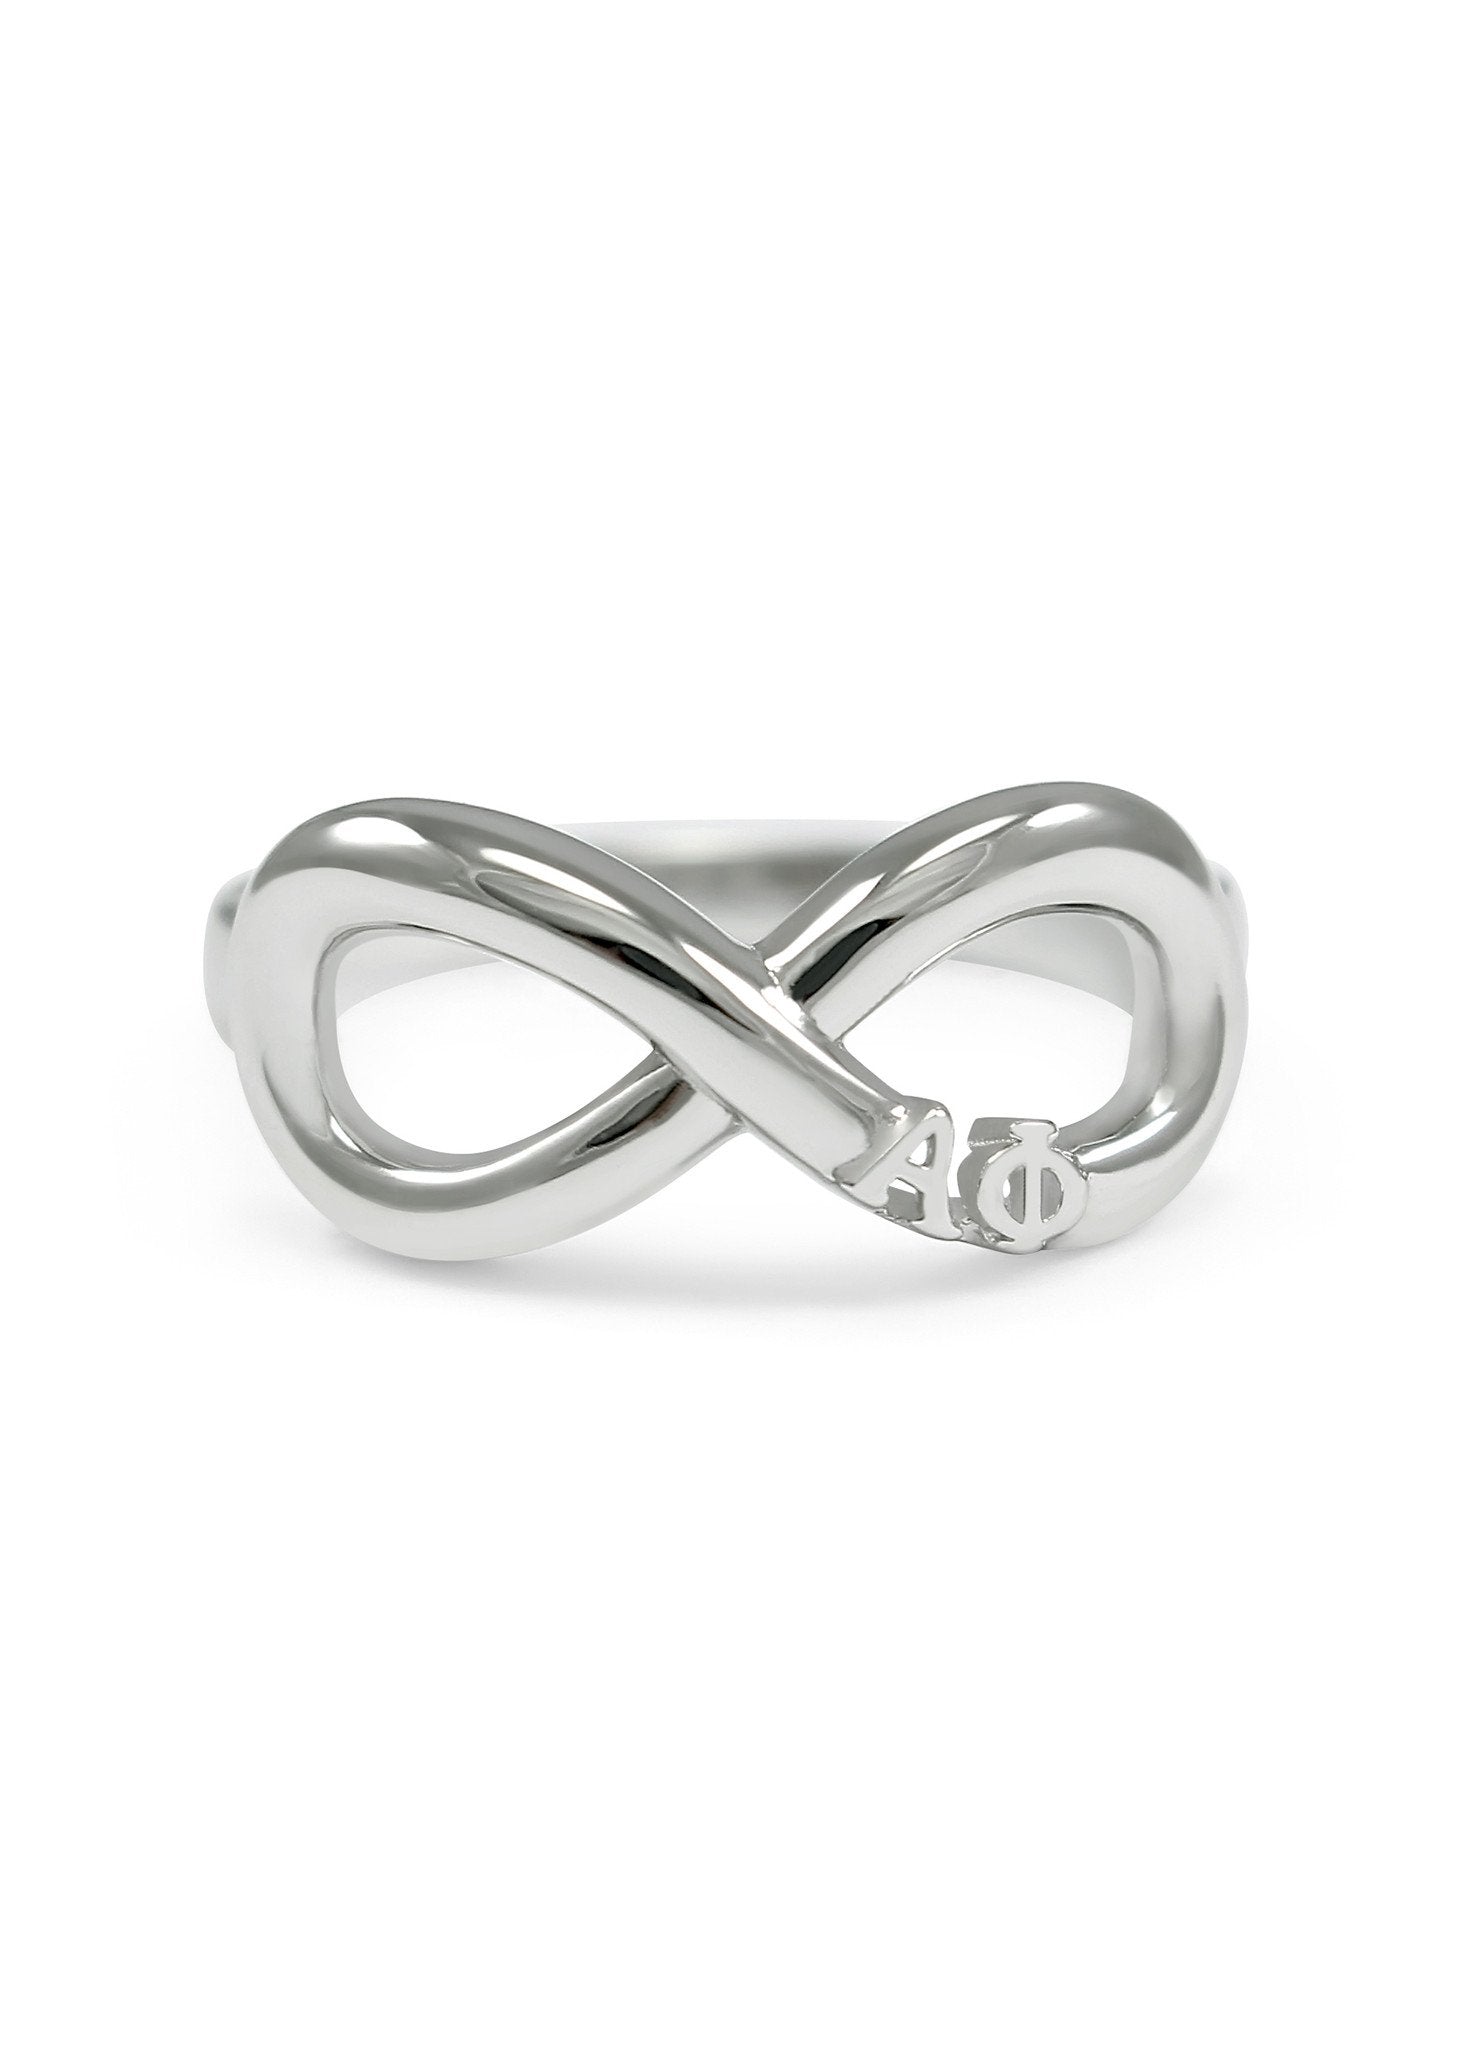 Infinity Ring Design at Offer Price at Candere by Kalyan Jewellers